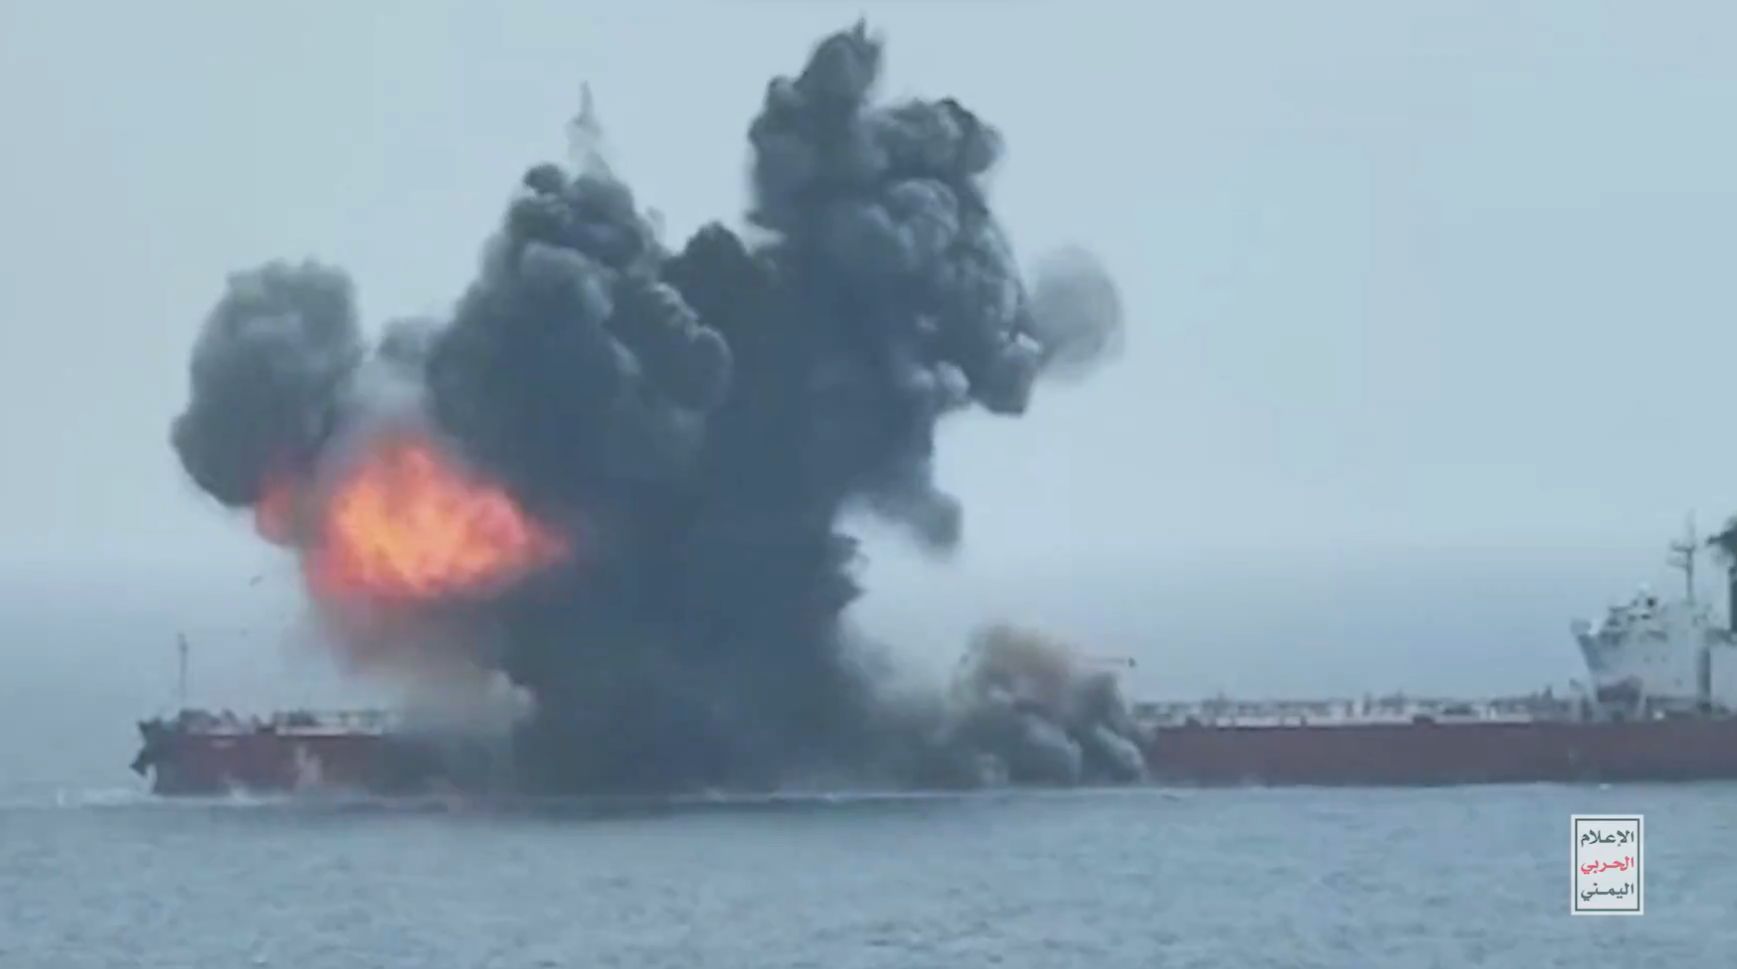 Tanker explosion in the Black Sea. The recording was posted online.